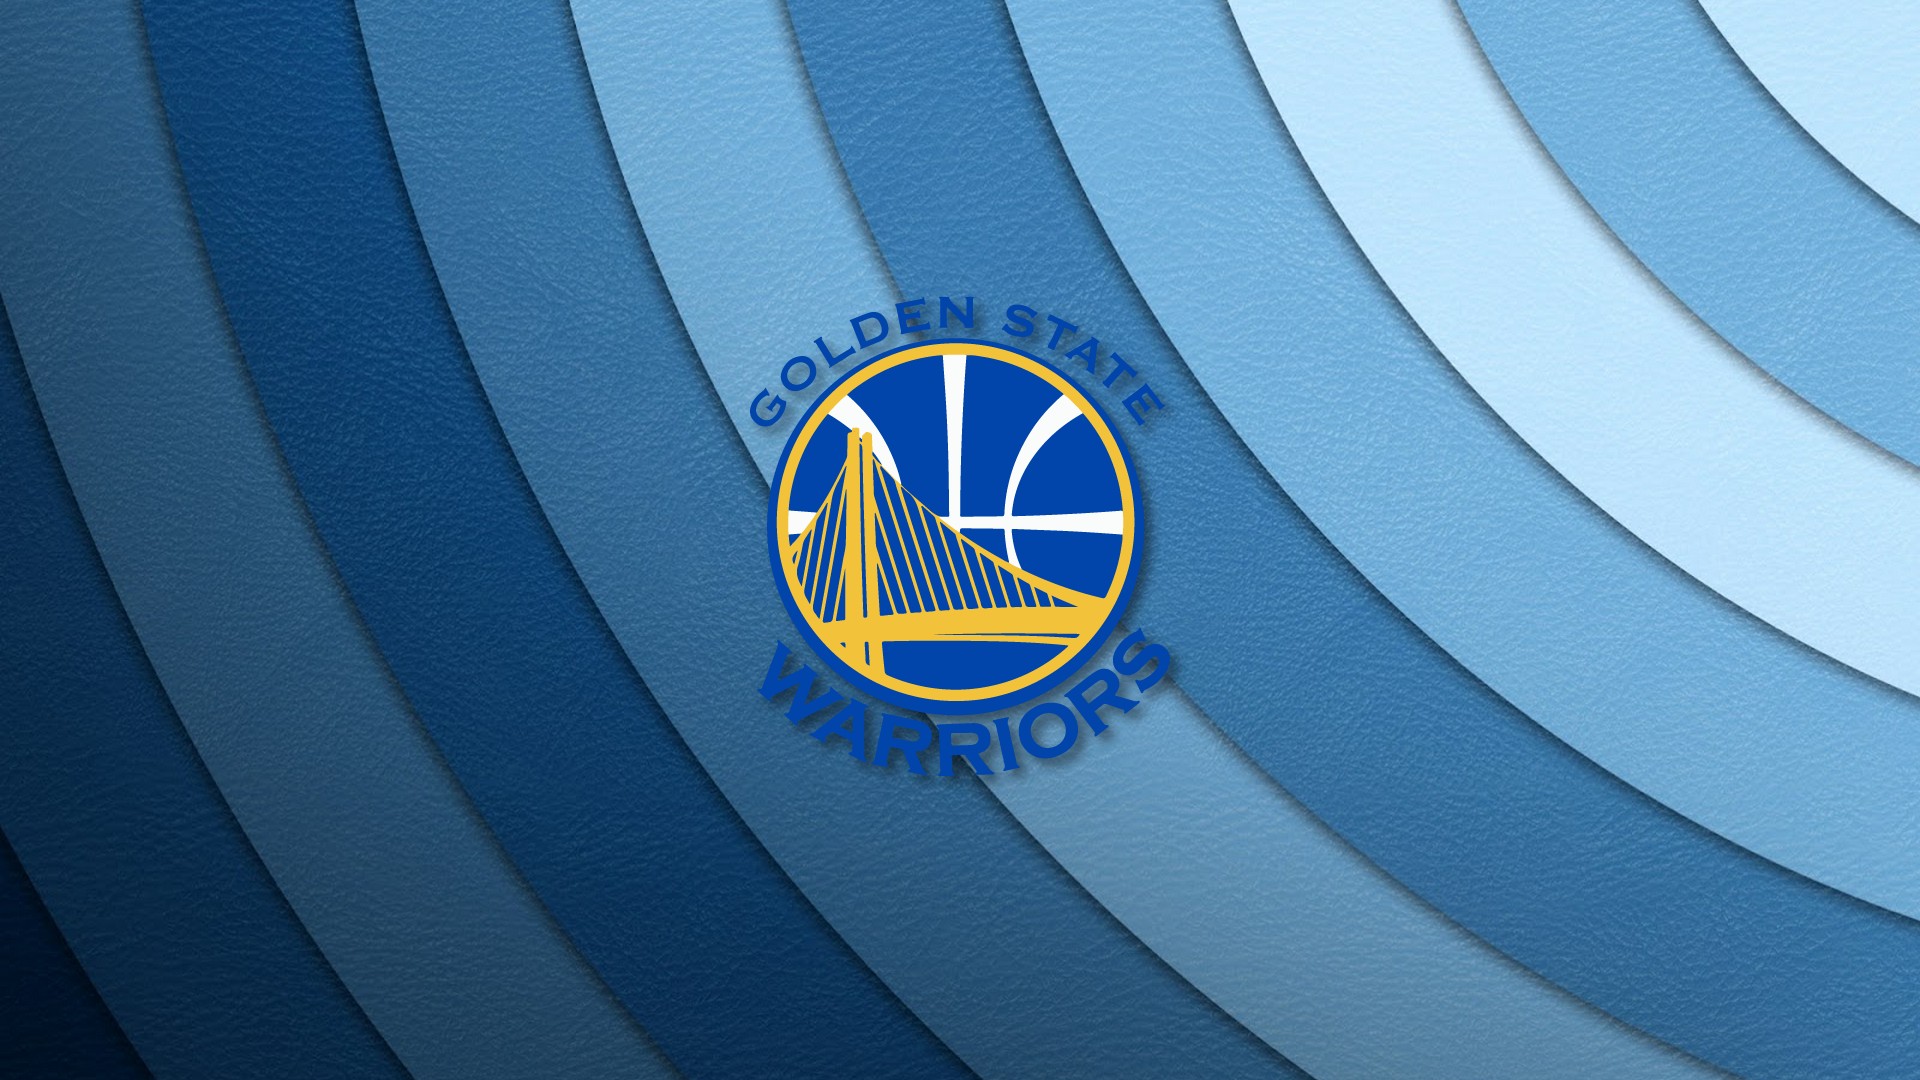 Wallpaper HD Golden State Warriors with image resolution 1920x1080 pixel. You can make this wallpaper for your Desktop Computer Backgrounds, Mac Wallpapers, Android Lock screen or iPhone Screensavers